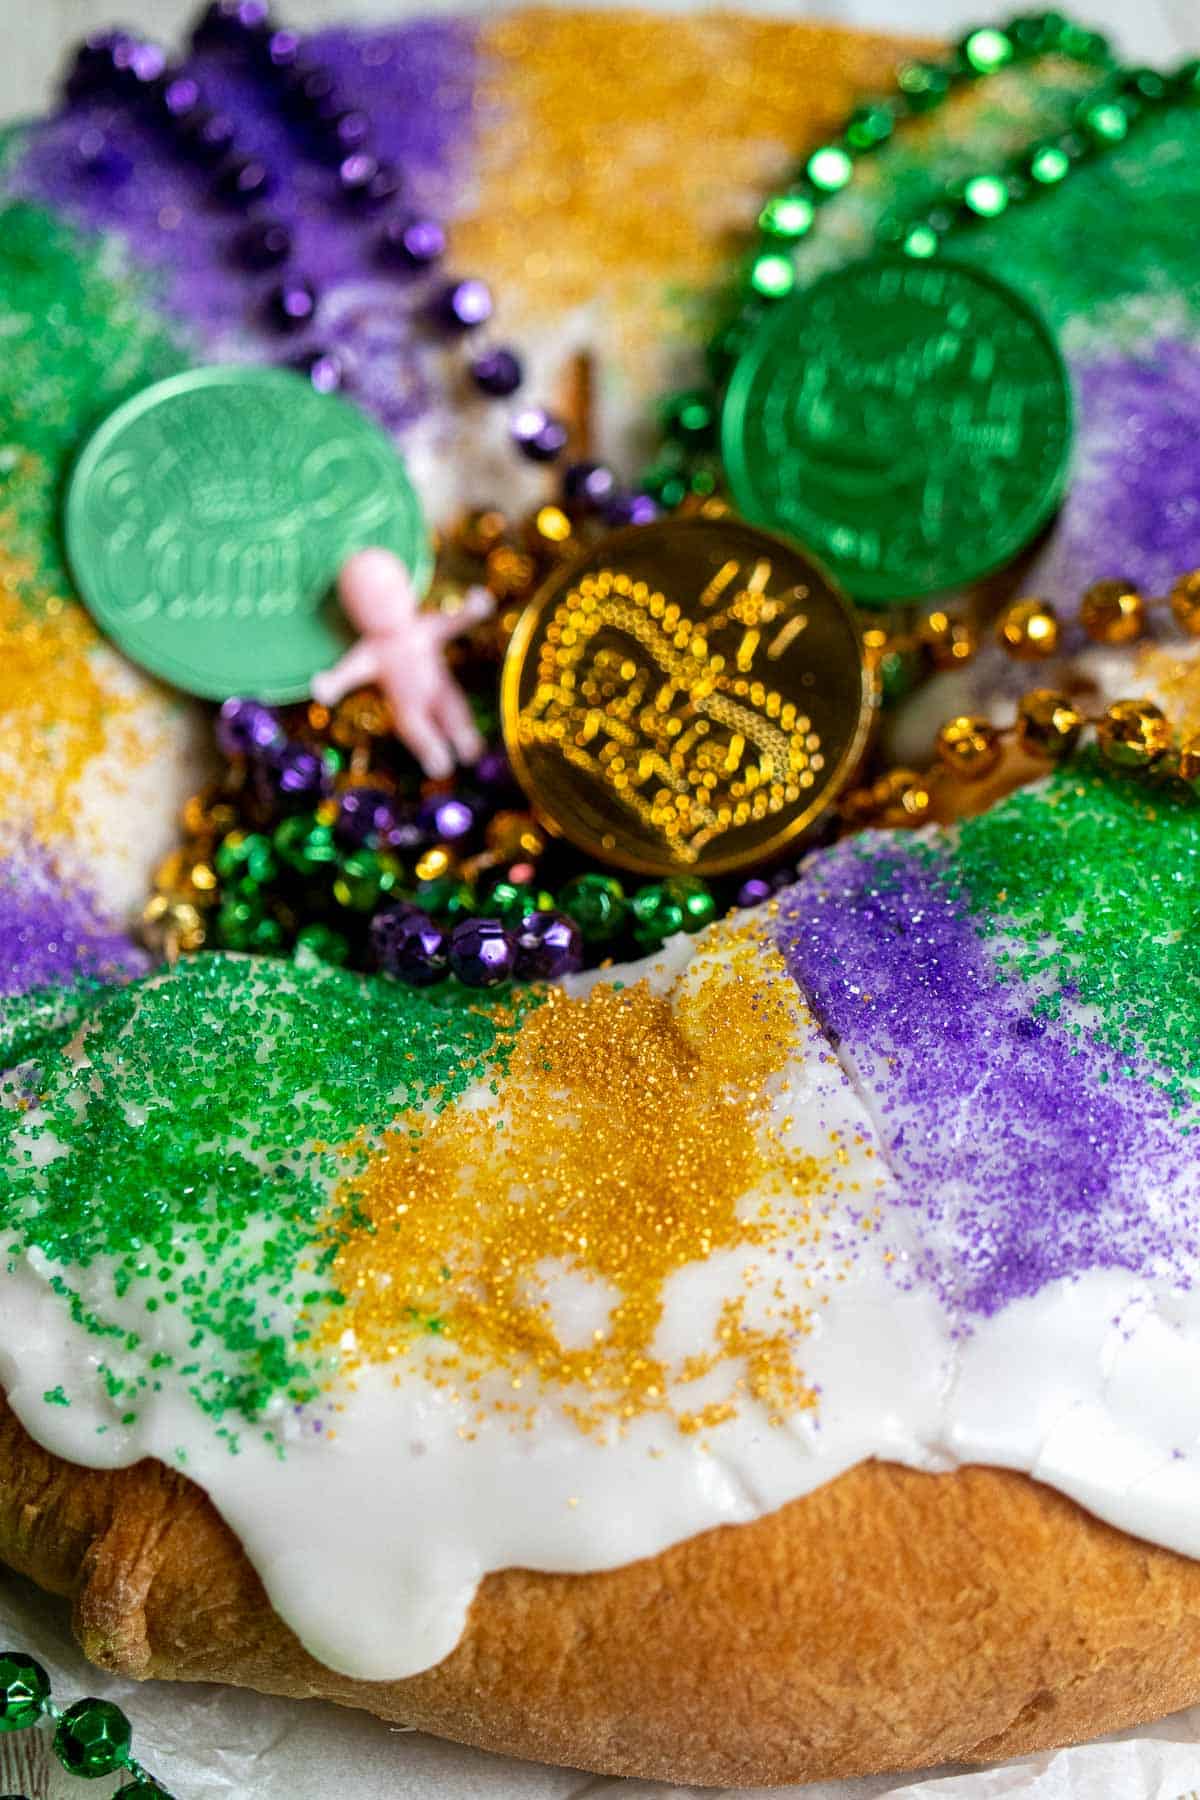 Overhead view of the side and middle of a New Orleans king cake.